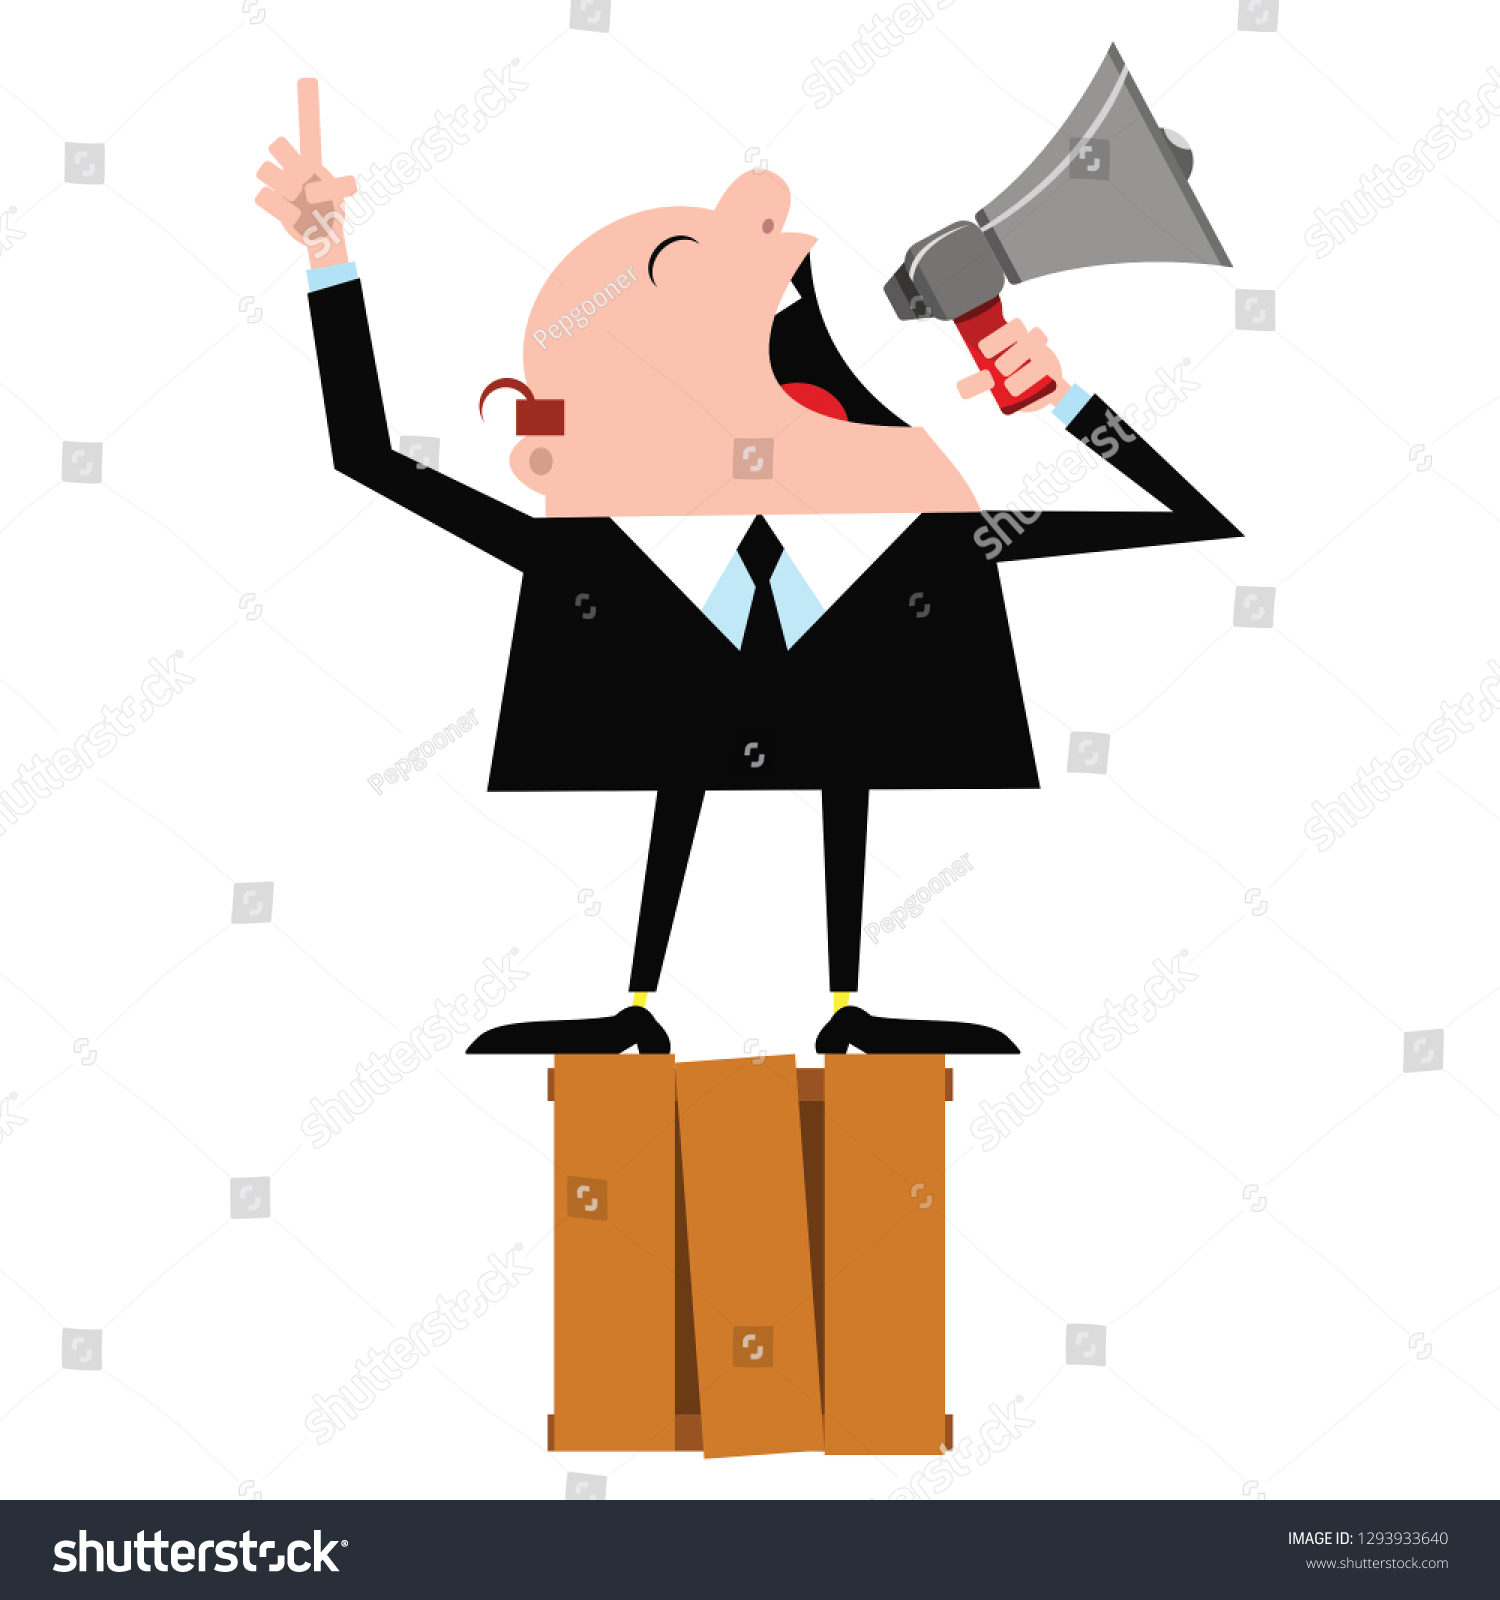 stock-photo-man-in-black-suit-shouting-into-megaphone-or-bullhorn-standing-on-soapbox-pointing-angrily-1293933640.jpg